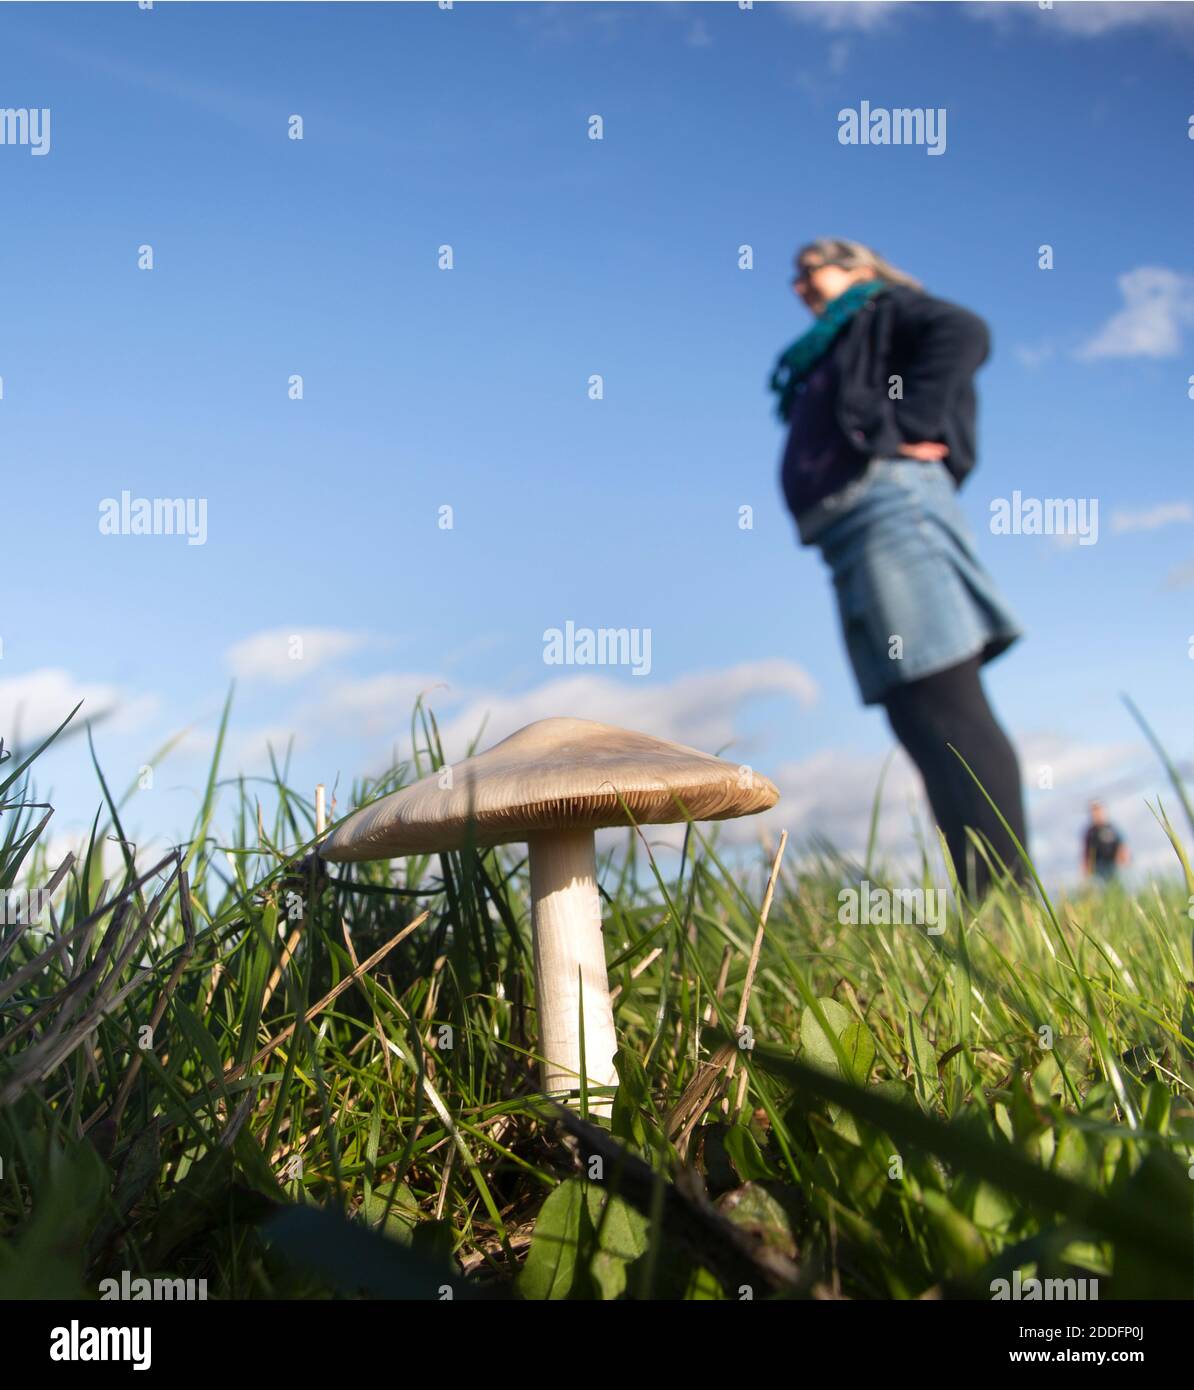 Low angle view of field mushroom, Agaricus campestris, growing in grass with blue sky blurry people standing above Stock Photo